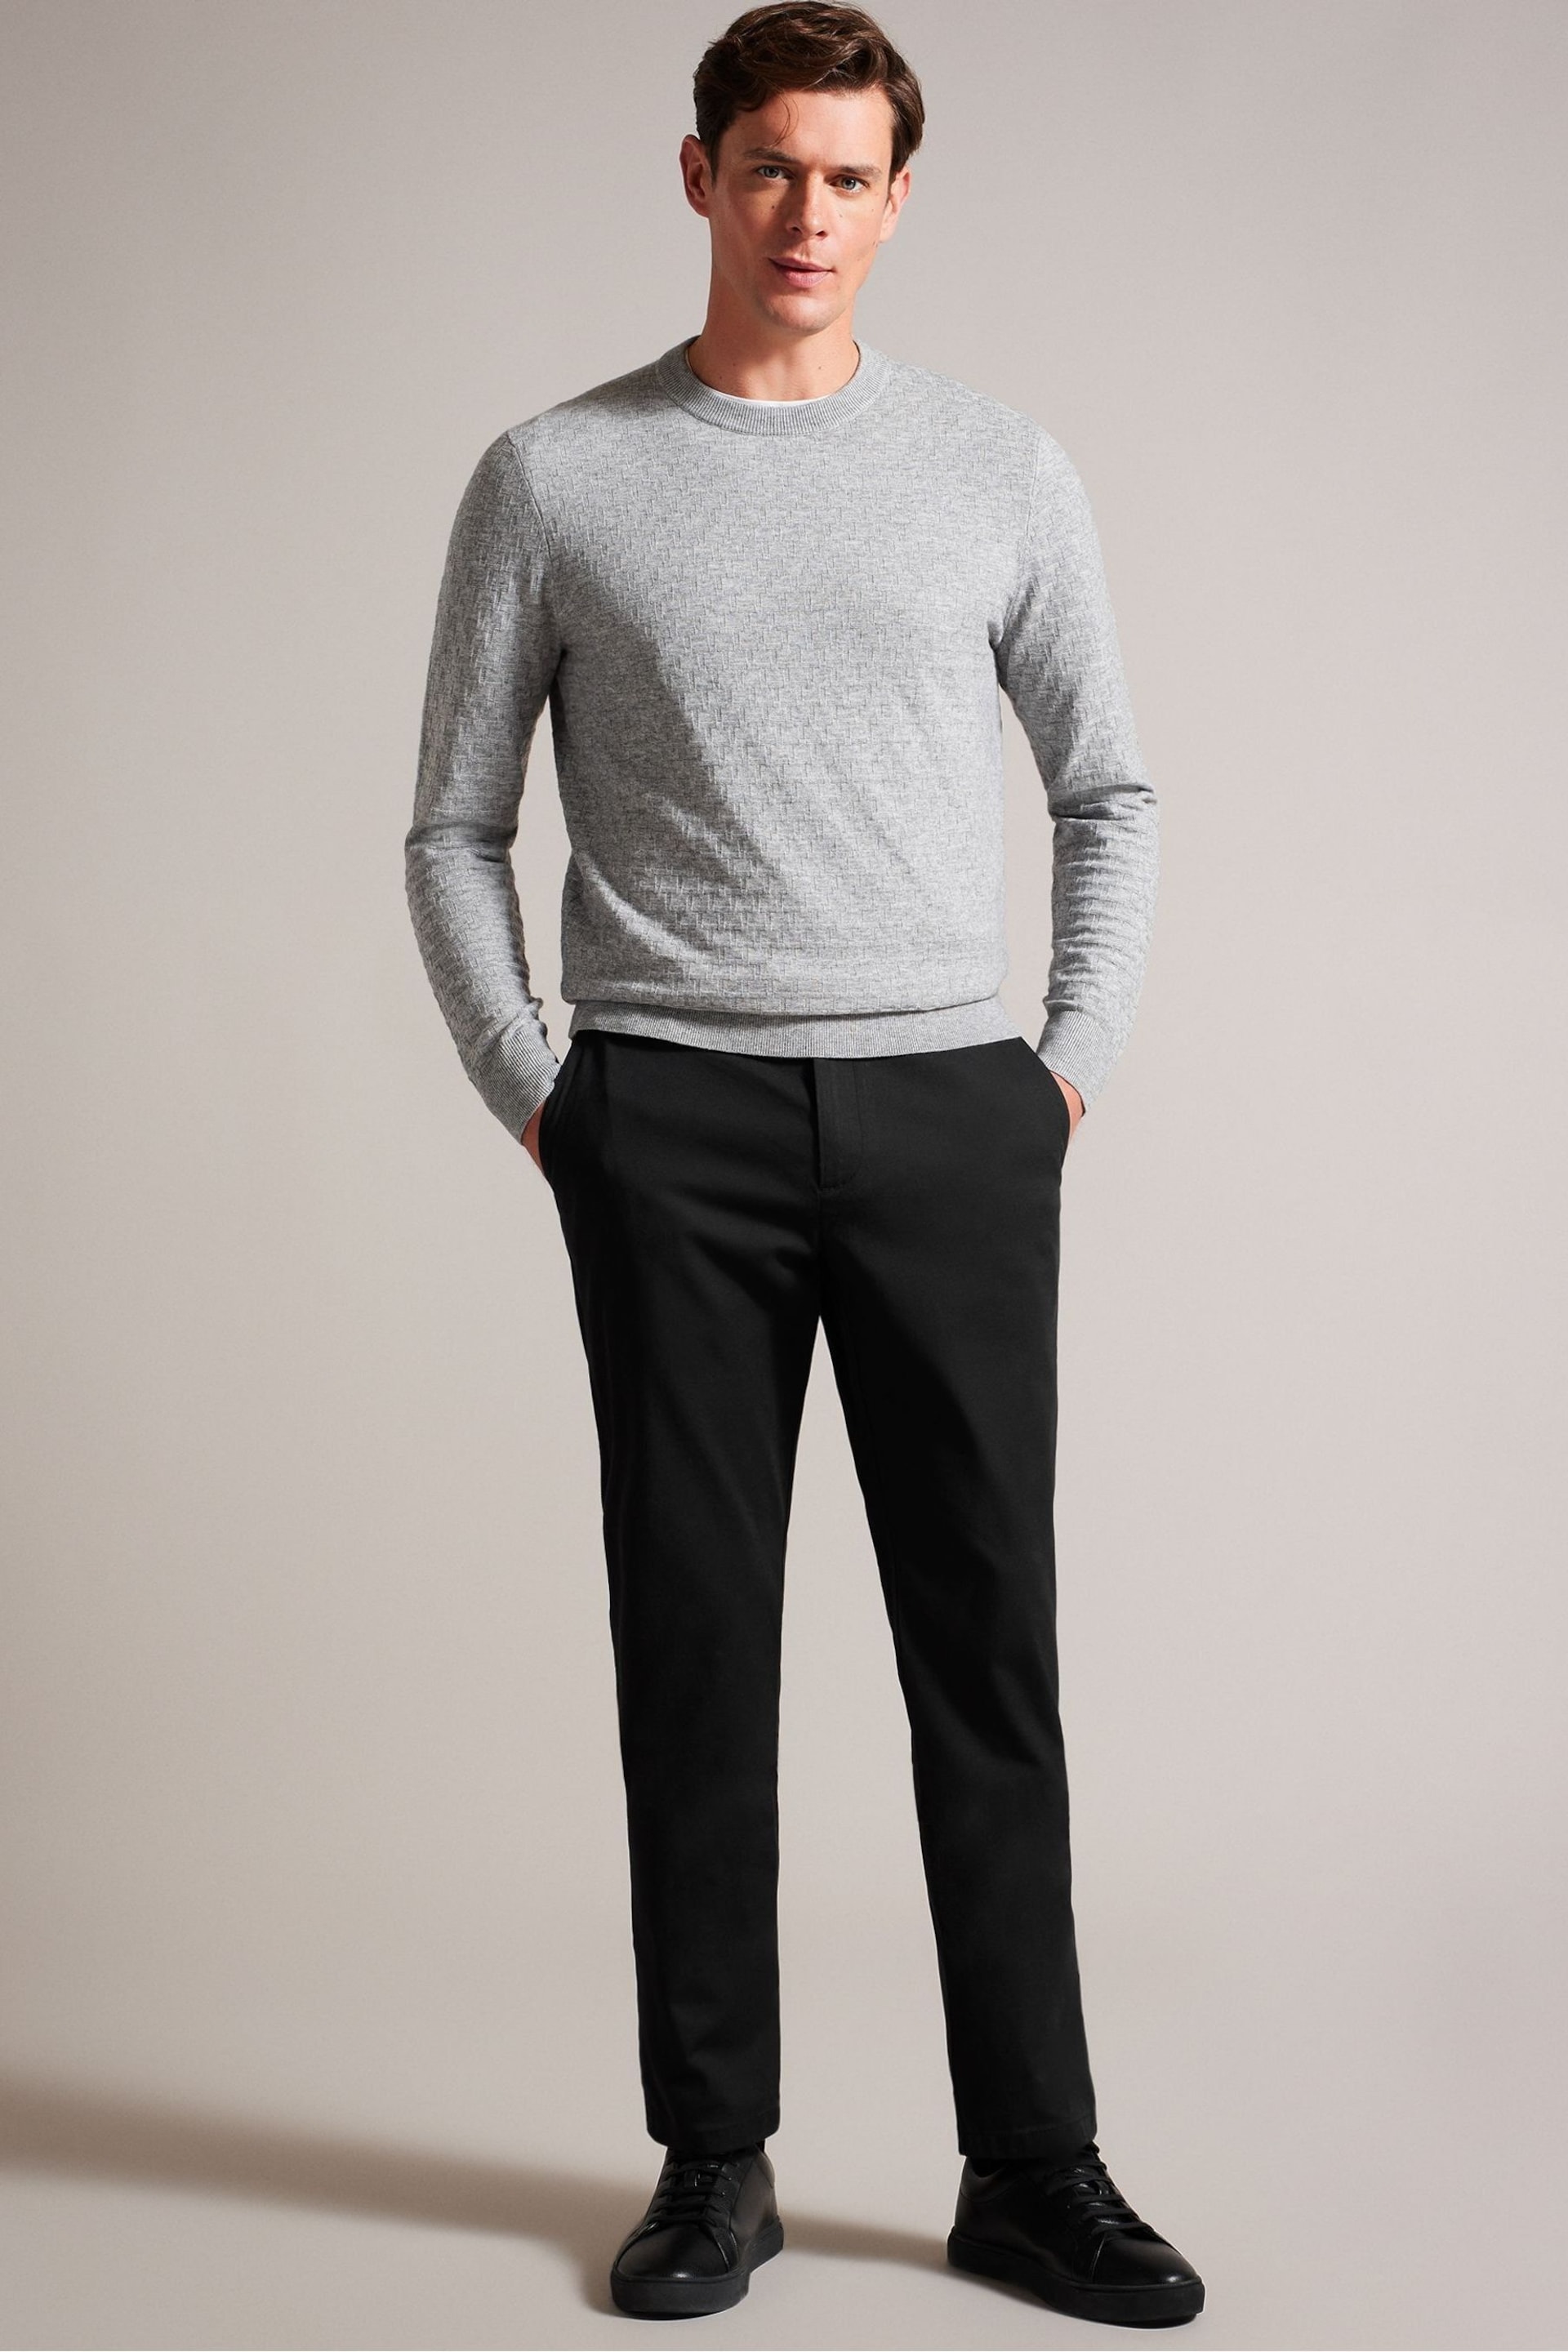 Ted Baker Black Slim Fit Haydae Textured Chino Trousers - Image 1 of 5